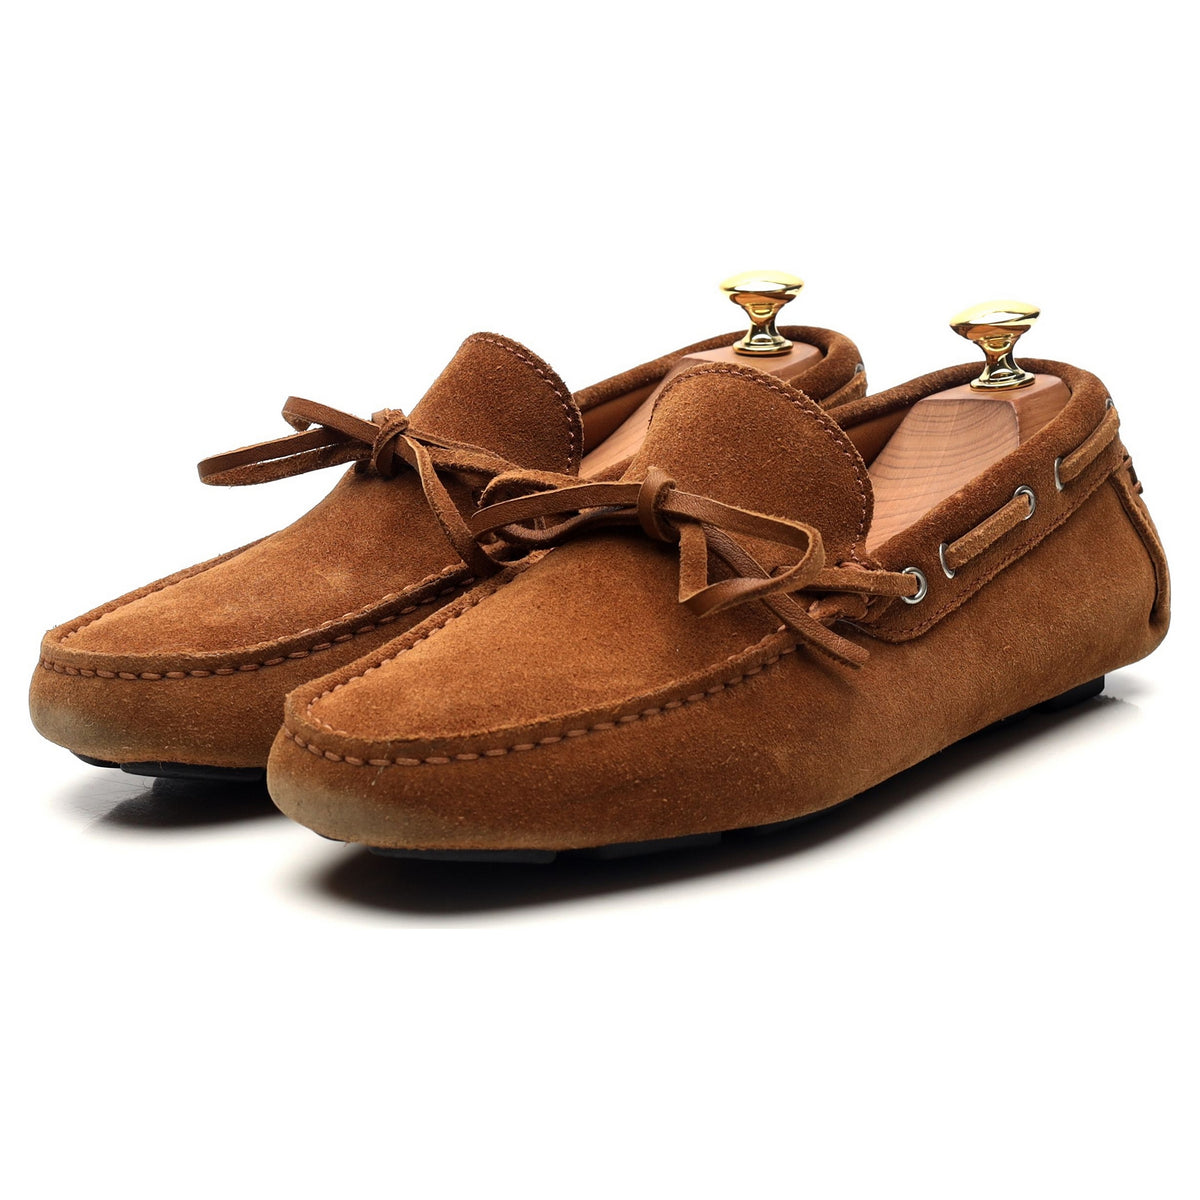 Brown Suede Driving Loafers UK 6.5